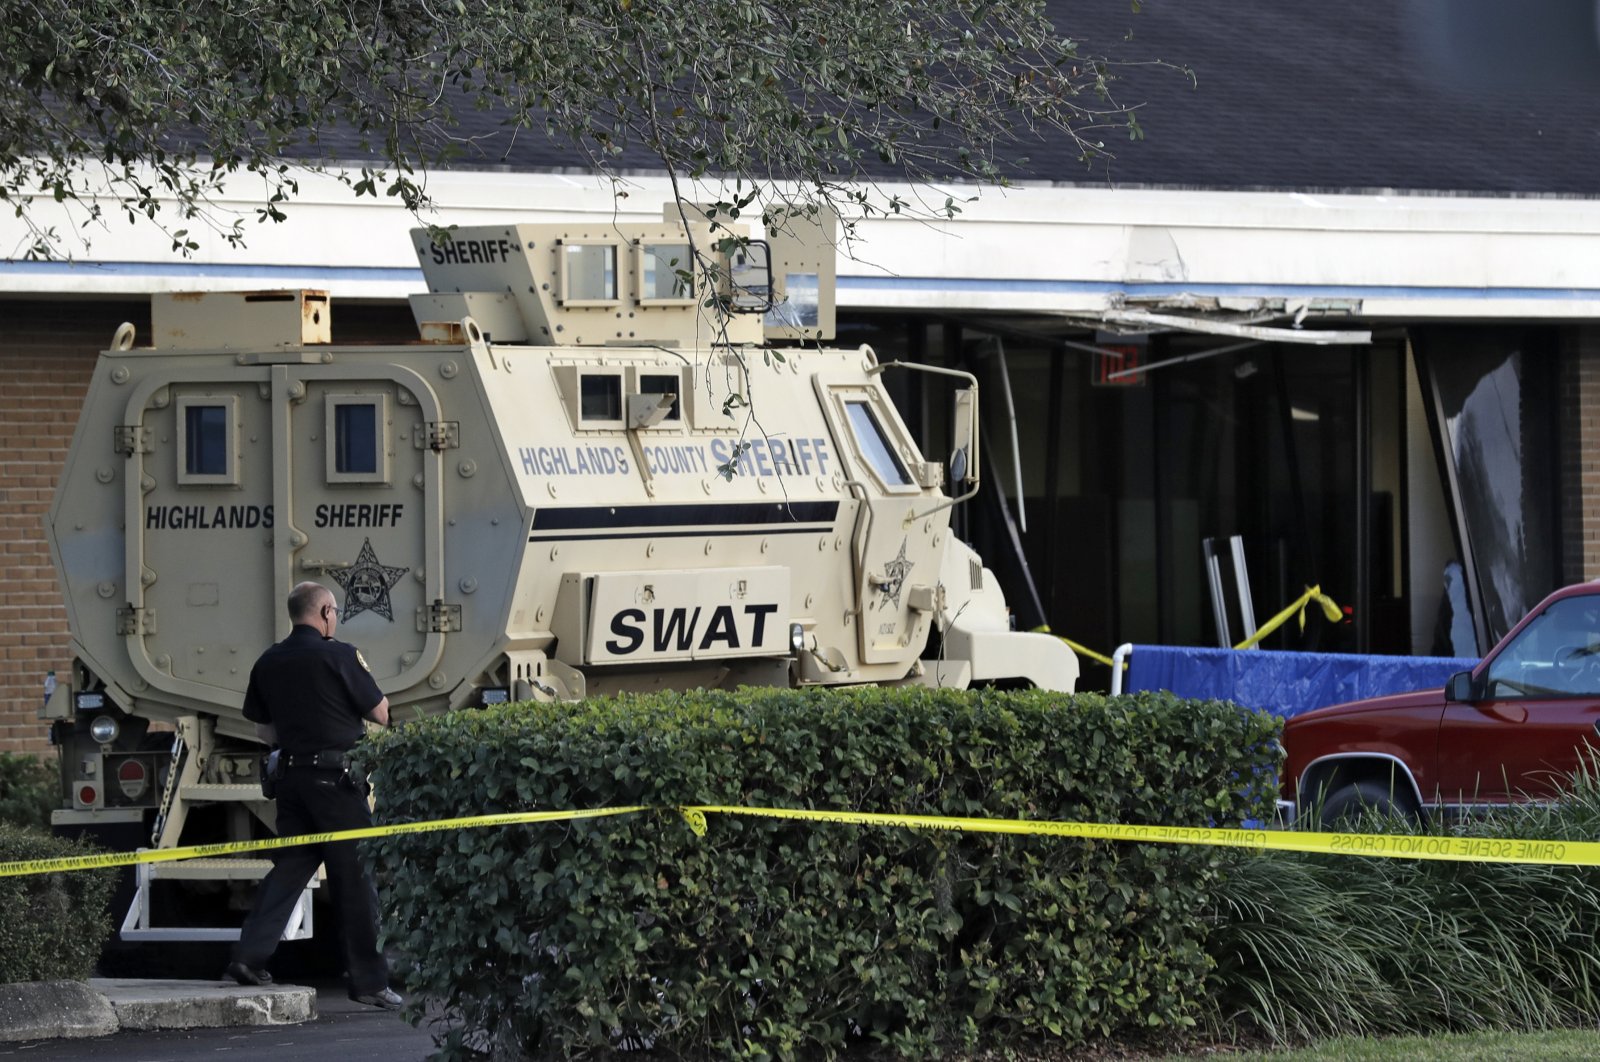 A police officer stands near a Highlands County Sheriff's SWAT vehicle that is stationed in front of a SunTrust Bank branch, Sebring, Florida, U.S., Jan. 23, 2019. (AP File Photo)